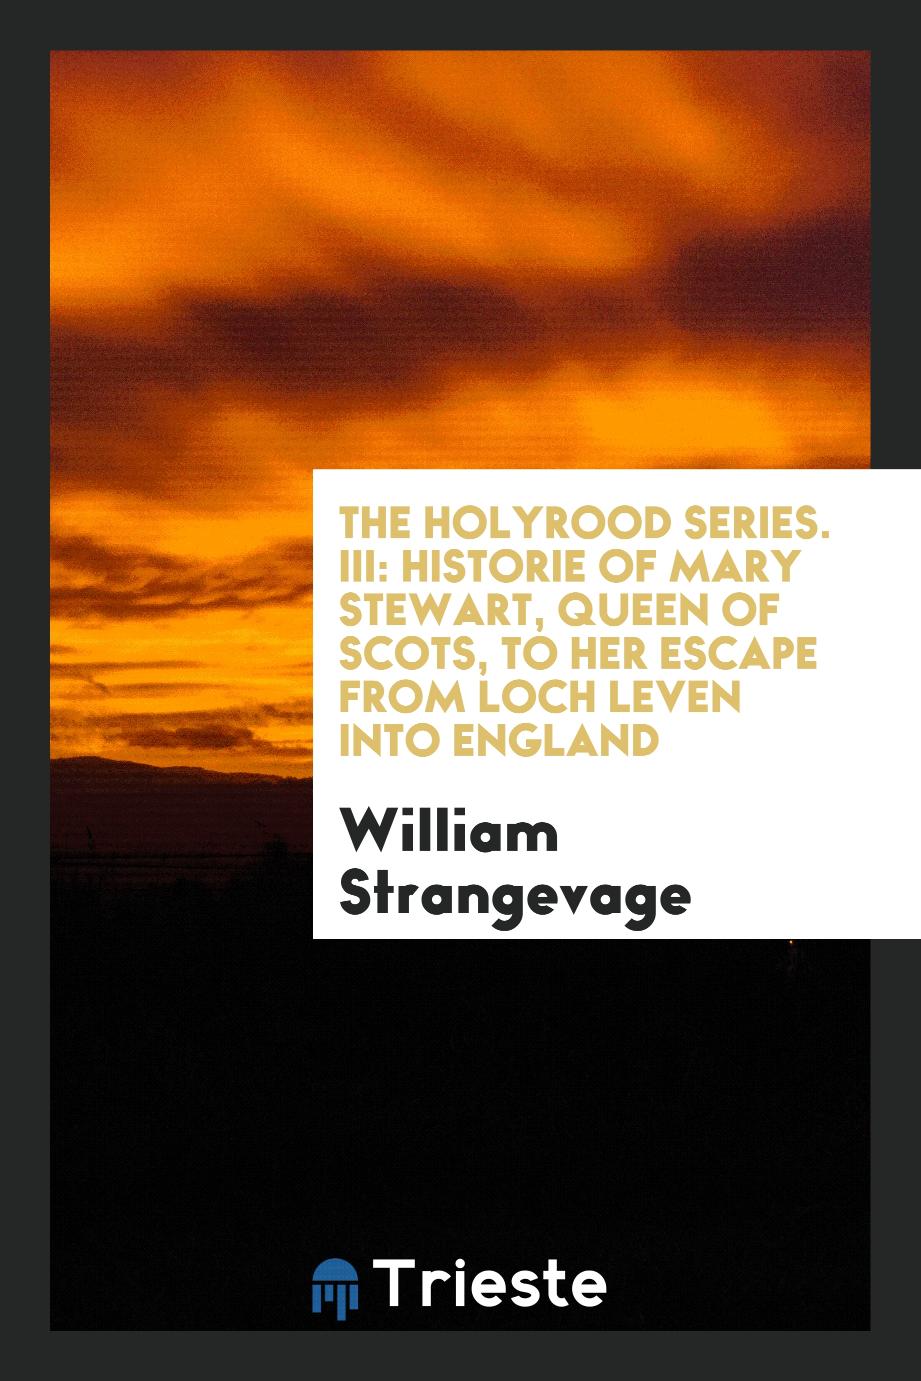 The Holyrood Series. III: Historie of Mary Stewart, Queen of Scots, to Her Escape from Loch Leven into England